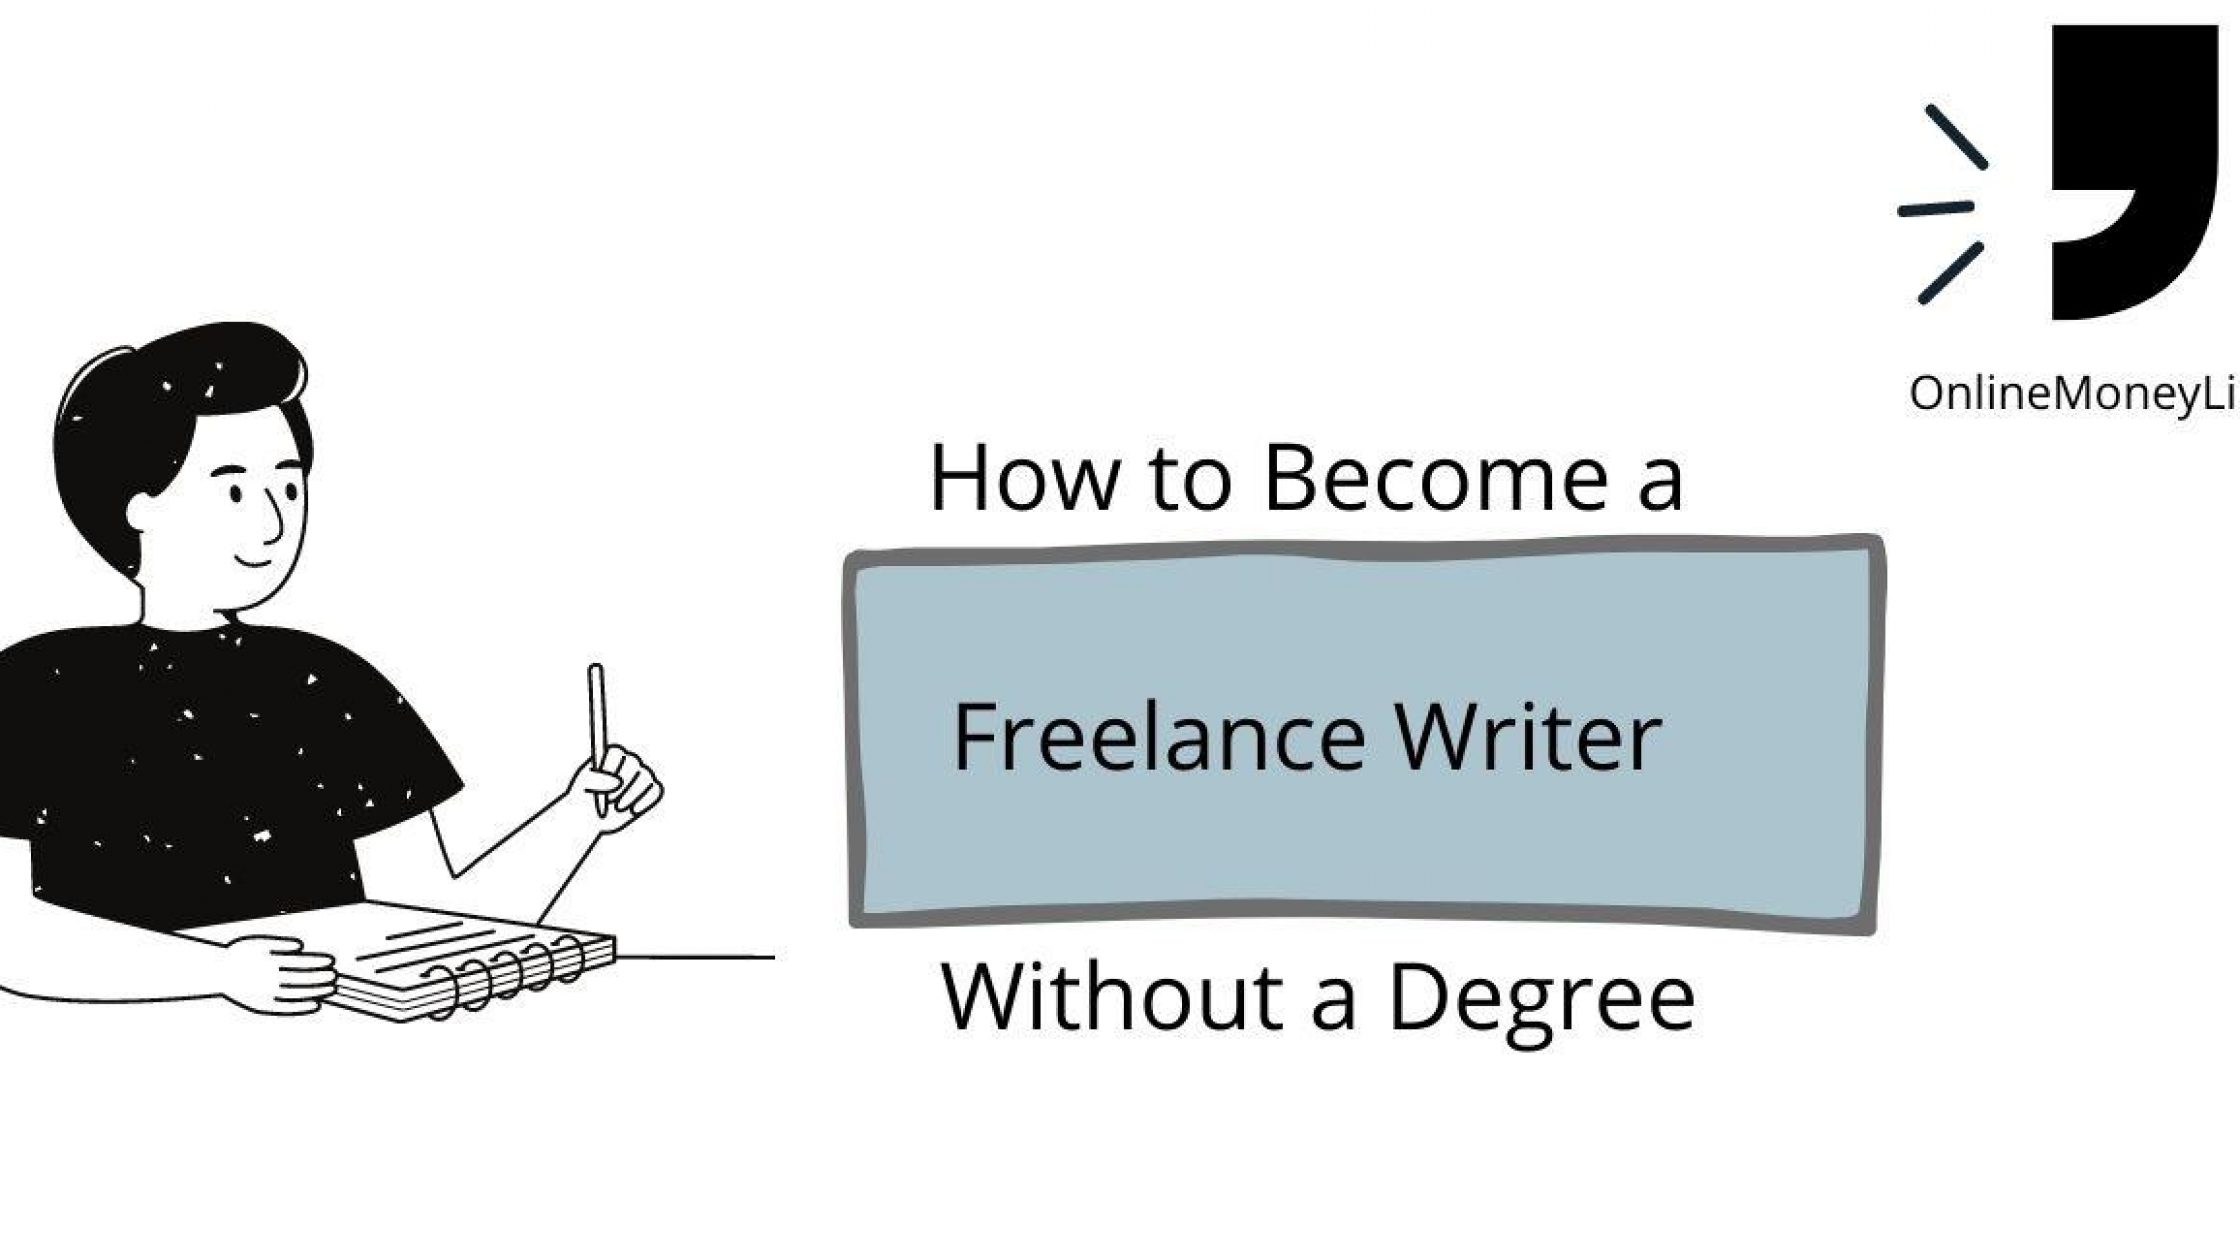 How To Become A Freelance Writer Without A Degree?